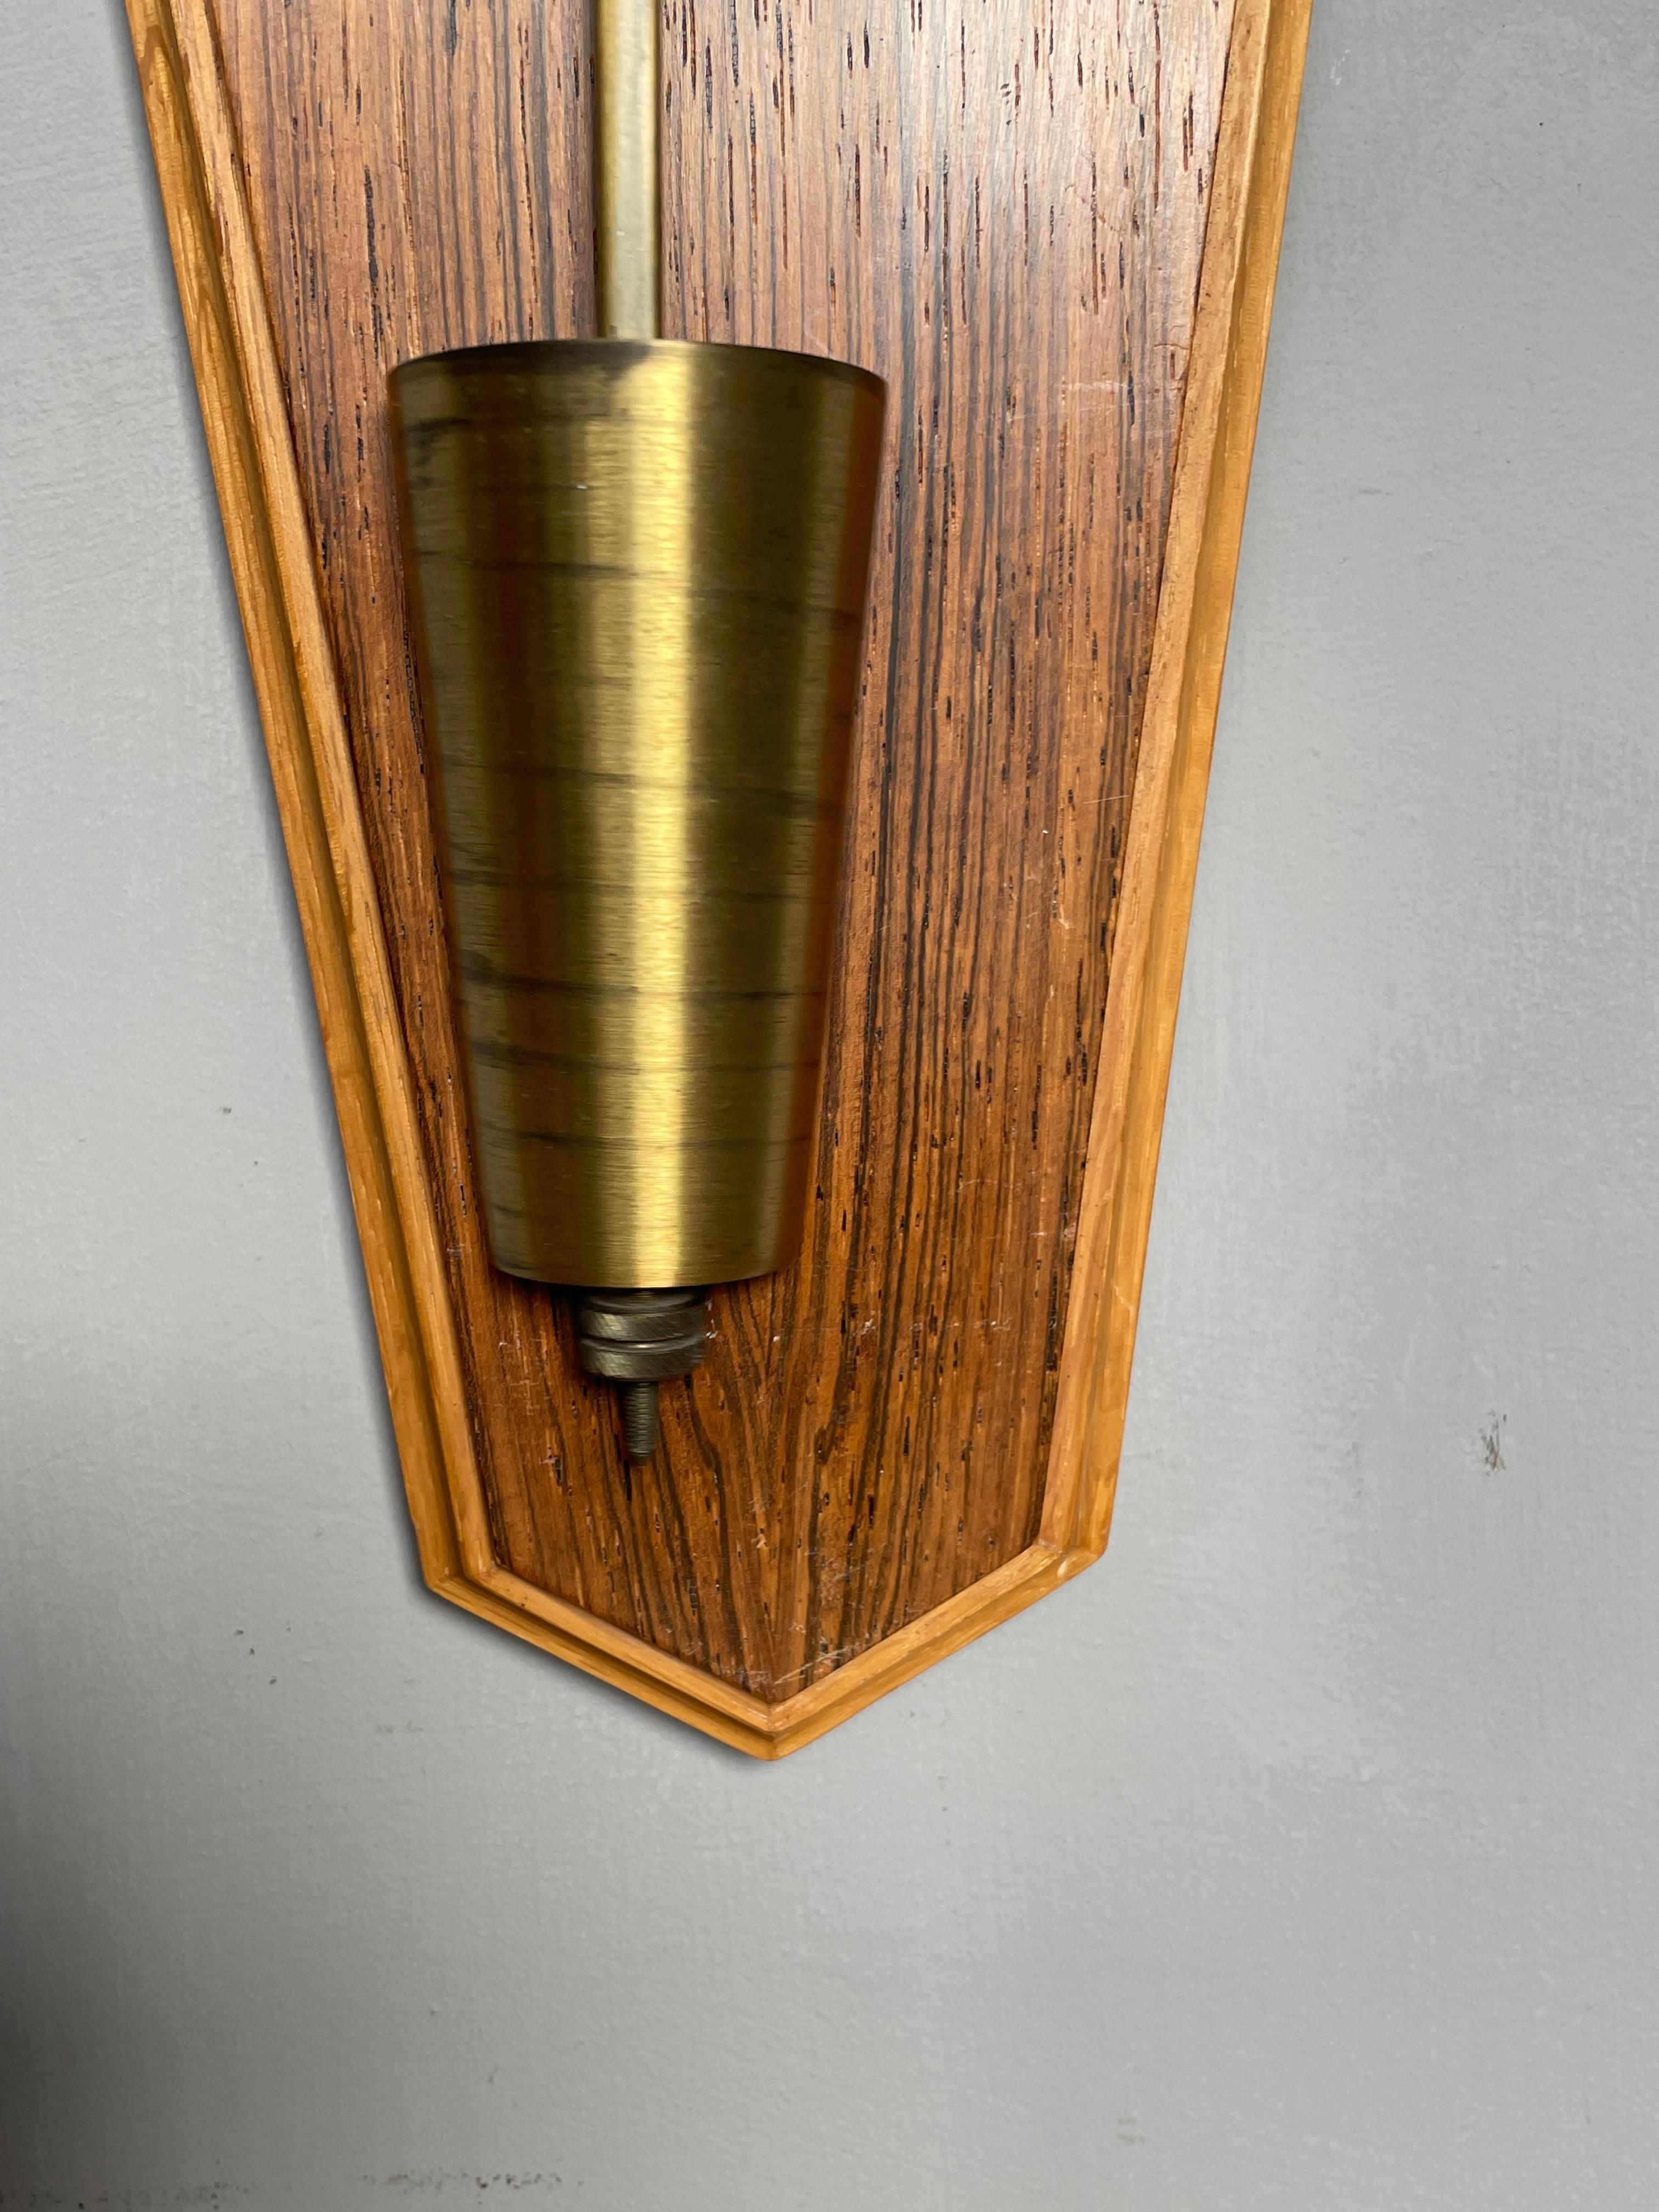 Beautiful Midcentury Modern Wooden Pendulum Wall Clock By Westerstrand, Sweden For Sale 1